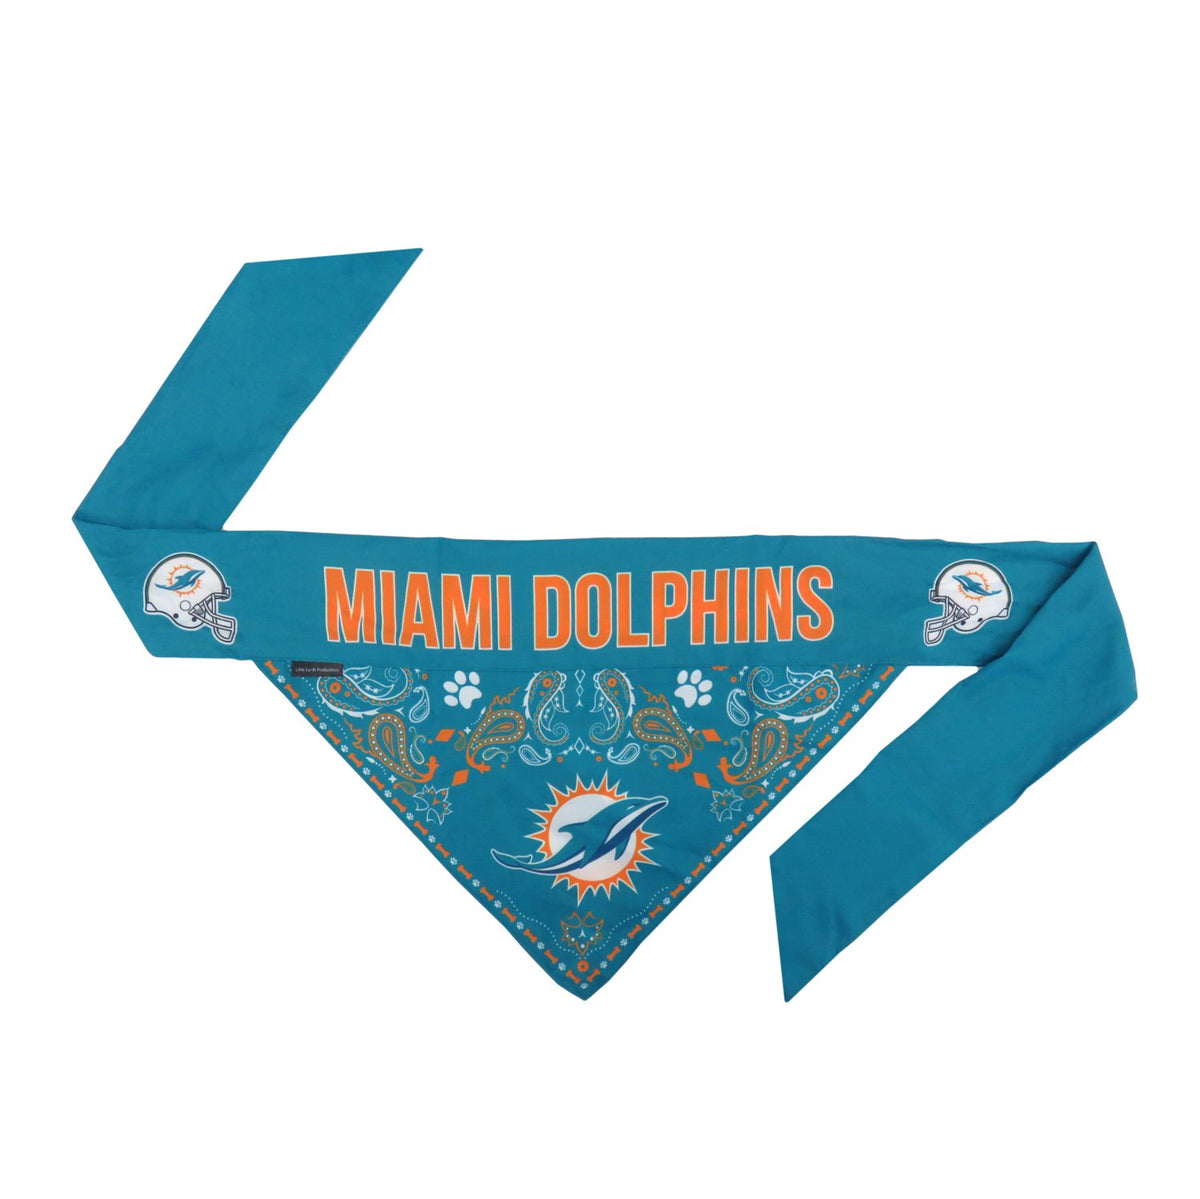 Miami Dolphins Reversible Bandana - 3 Red Rovers